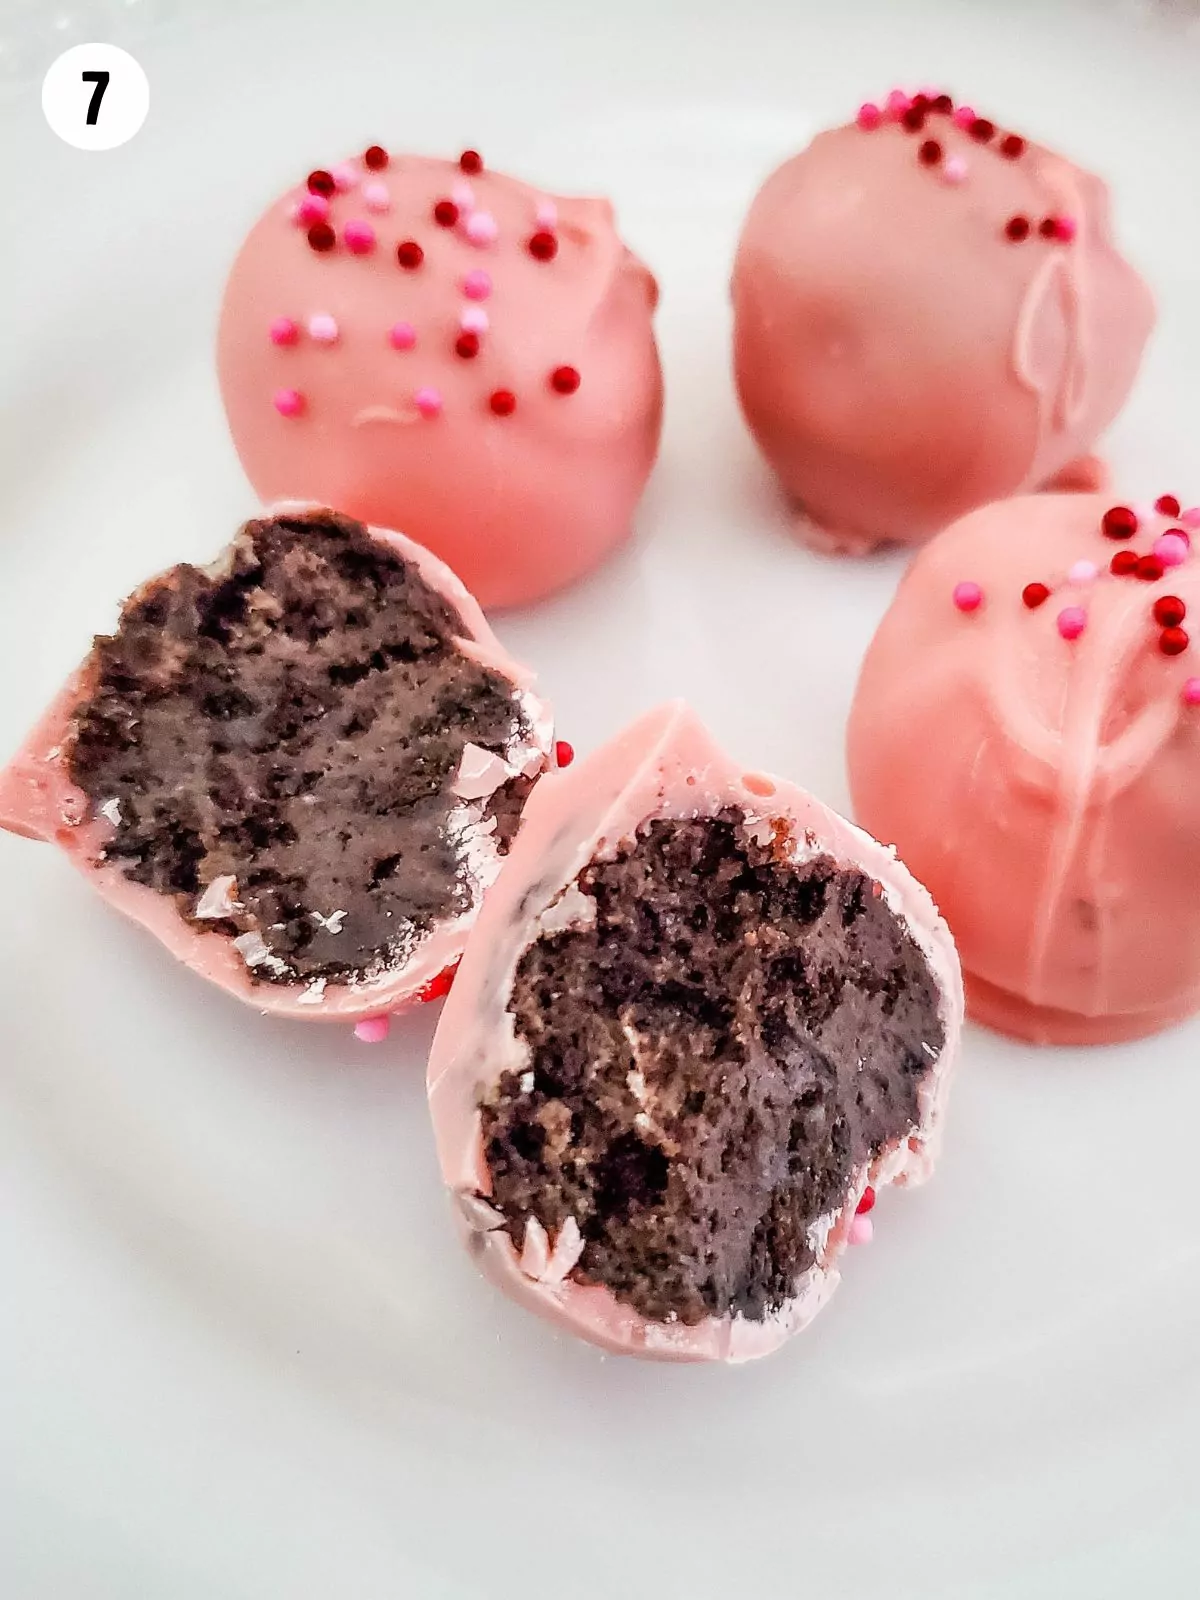 Inside view of Oreo balls dipped in pink melted chocolate.